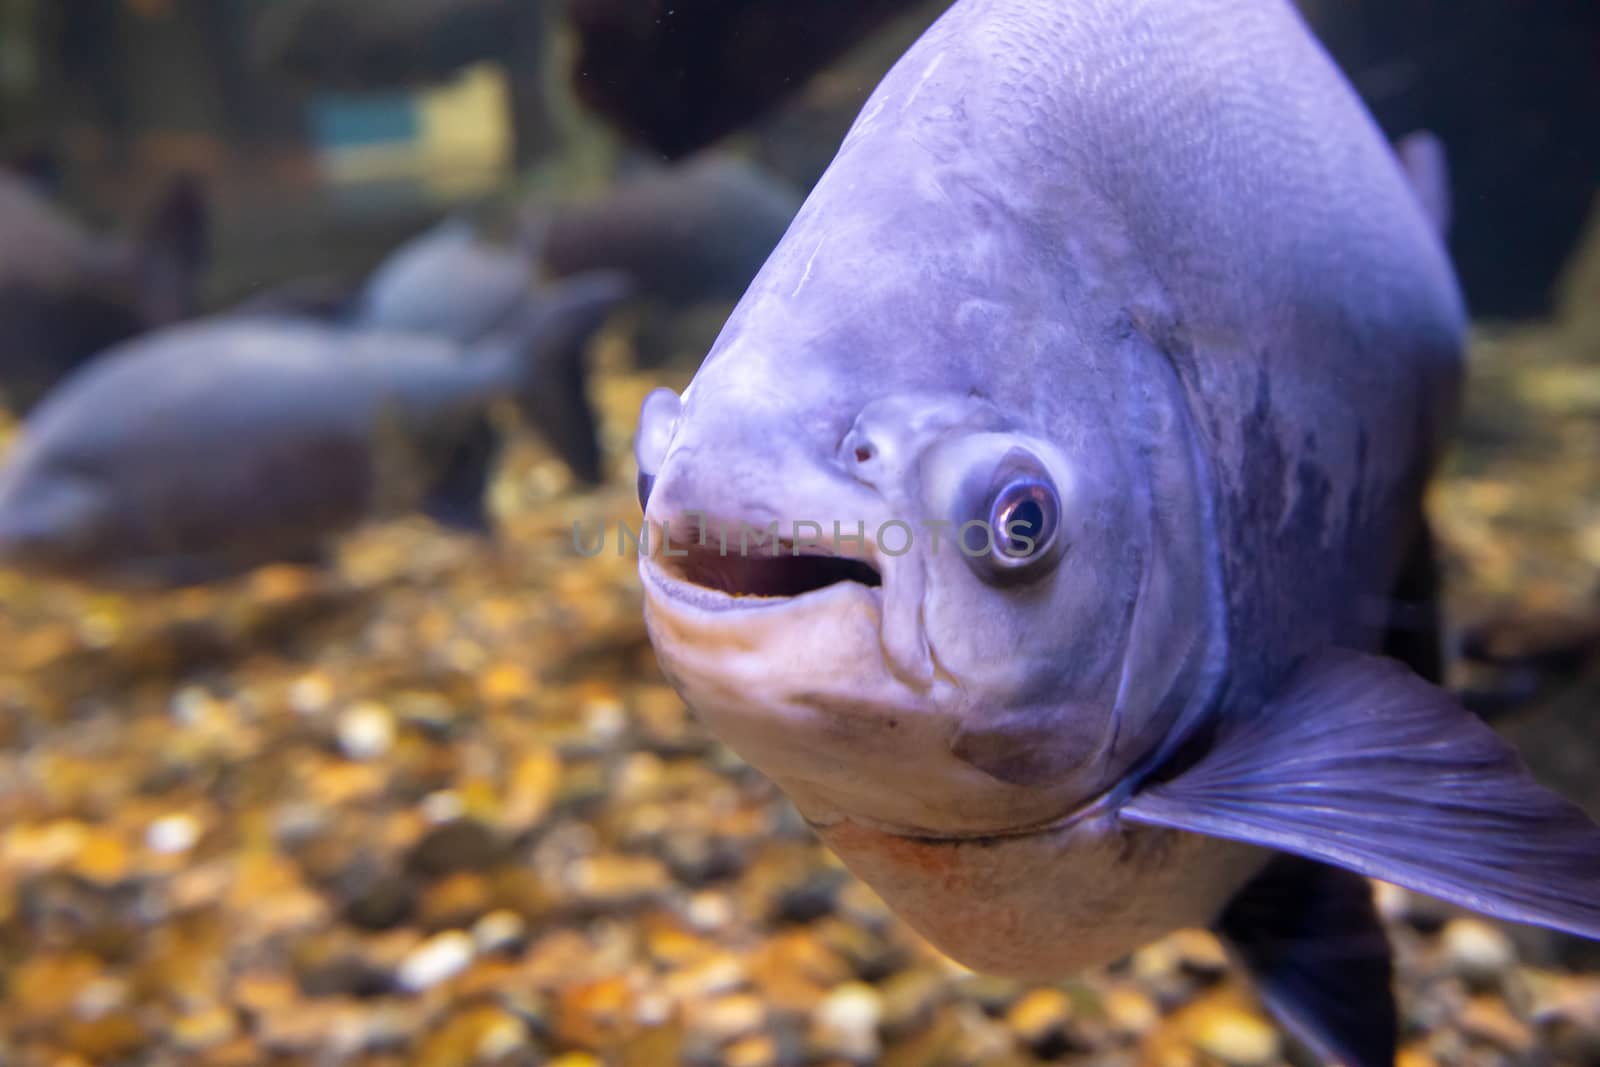 Fresh water Pacu looking at the camer with what seems to be a smile on it's face